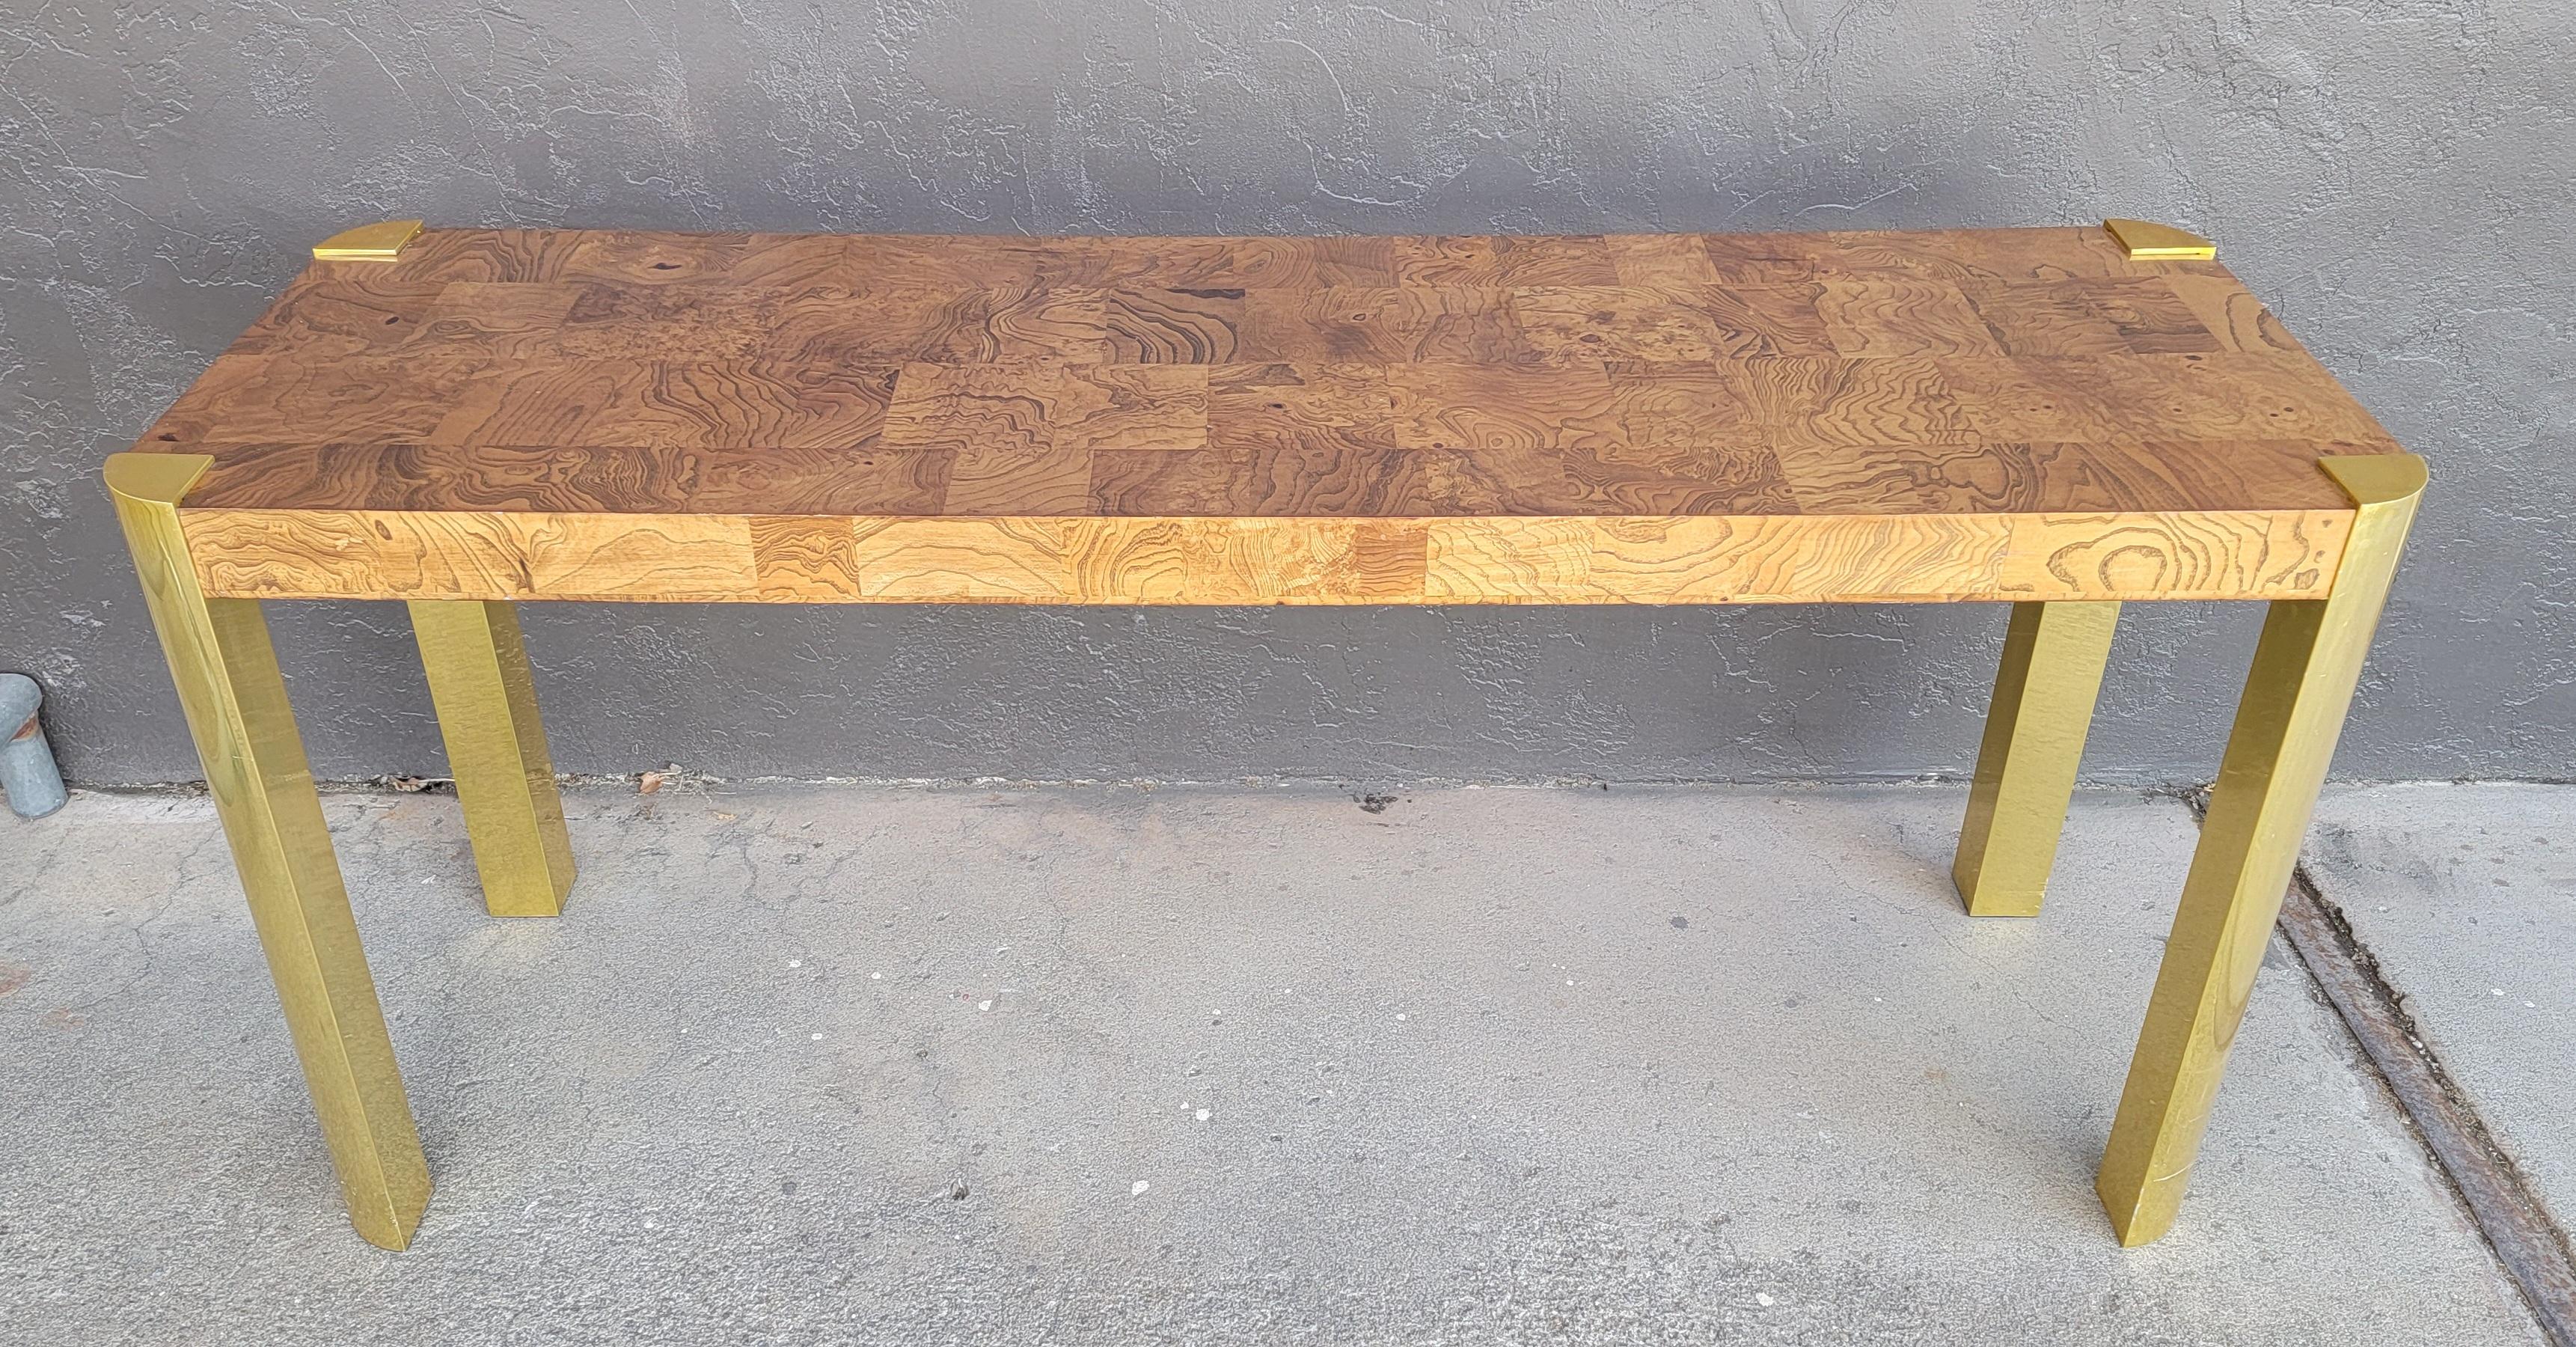 Patchwork Mid-Century Modern / Hollywood Regency console table attributed to Milo Baughman. Possibly inspired by the designs of Paul Evans. Beautiful burl wood tile surface and aprons mounted to brass legs. Measures 57 inches wide.